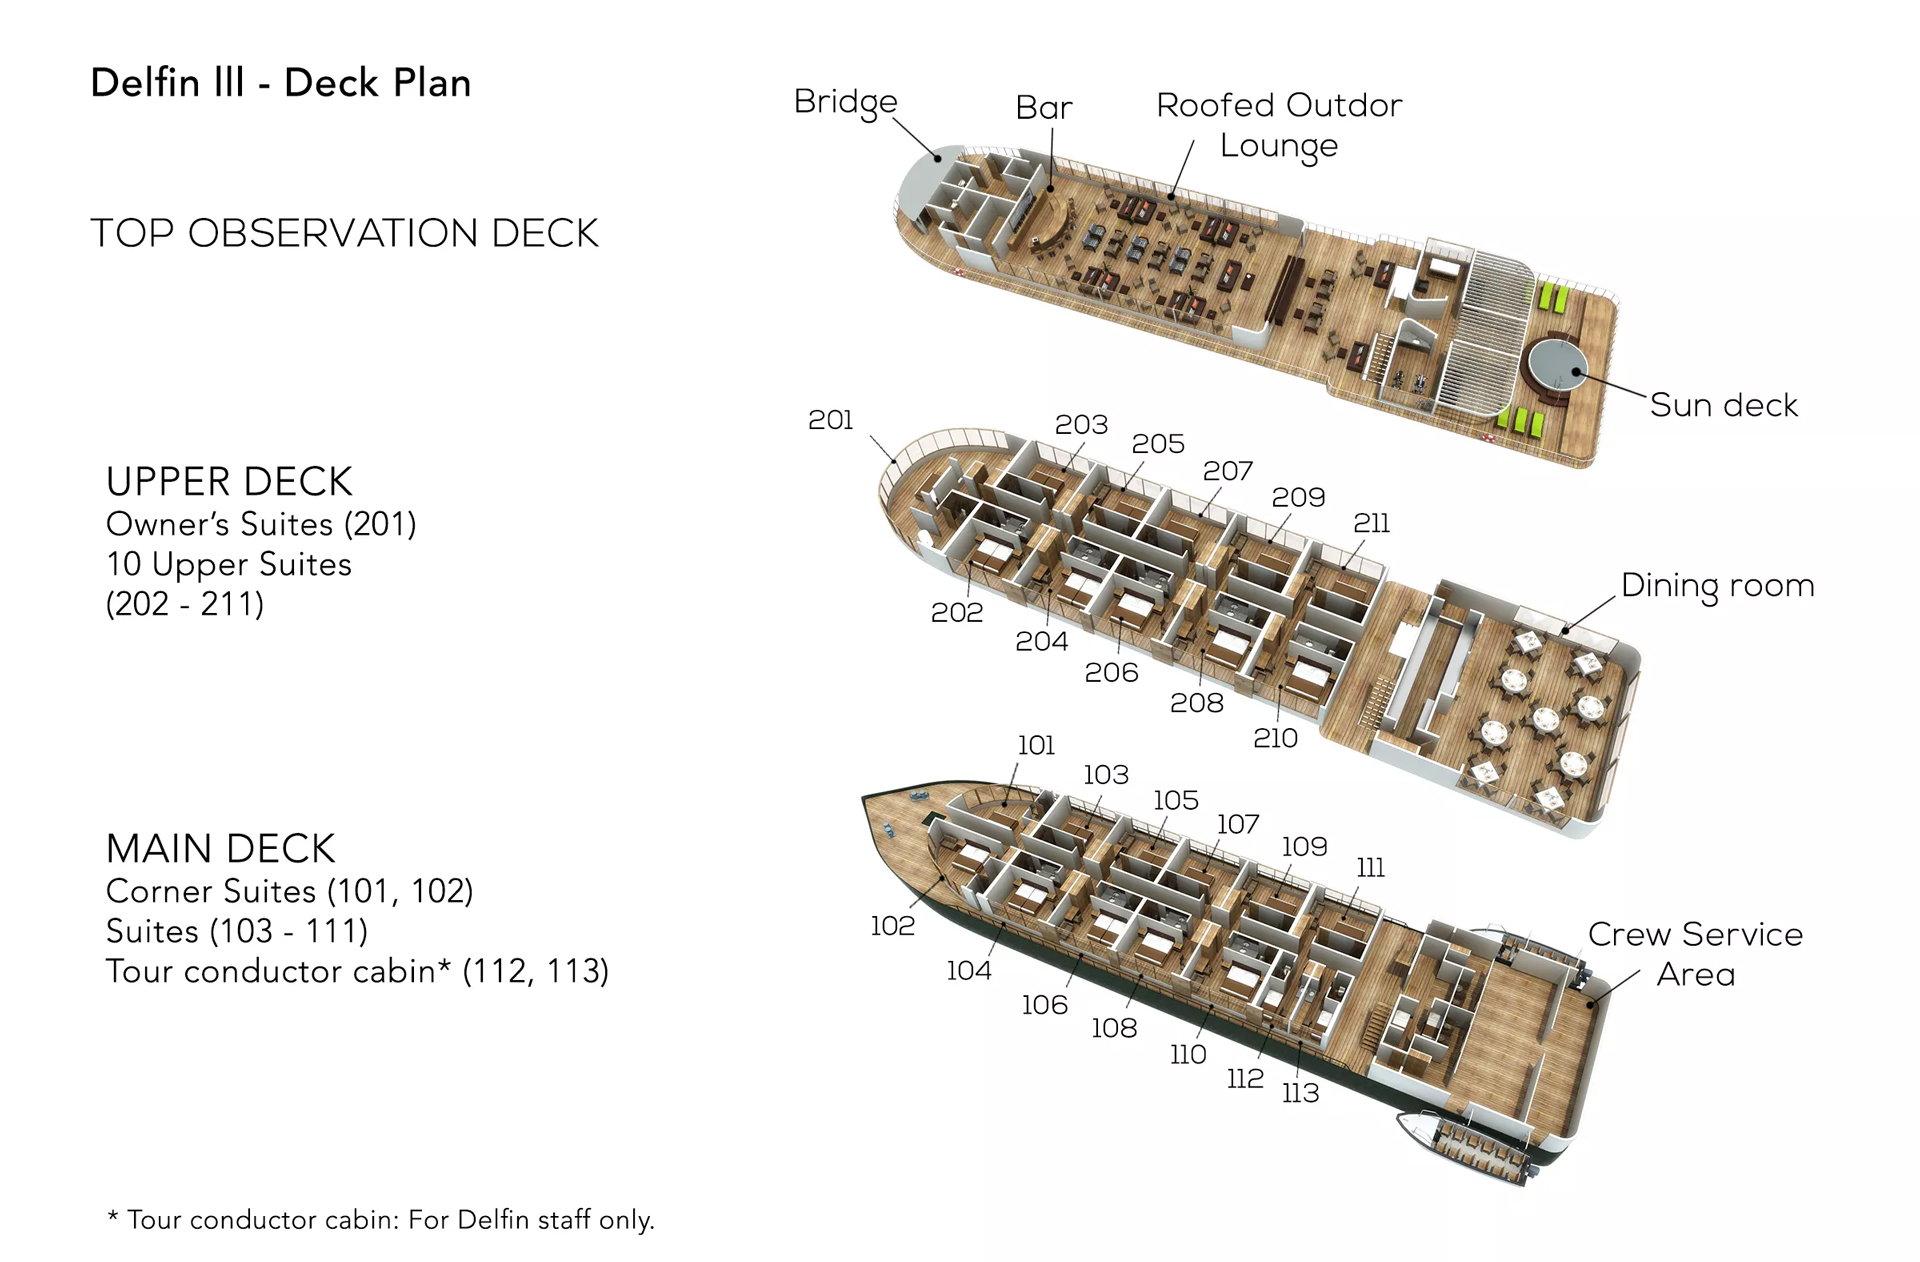 Deck plan of Delfin III riverboat on Amazon River cruise, with Main Deck, Upper Deck and Top Observation Deck detailed